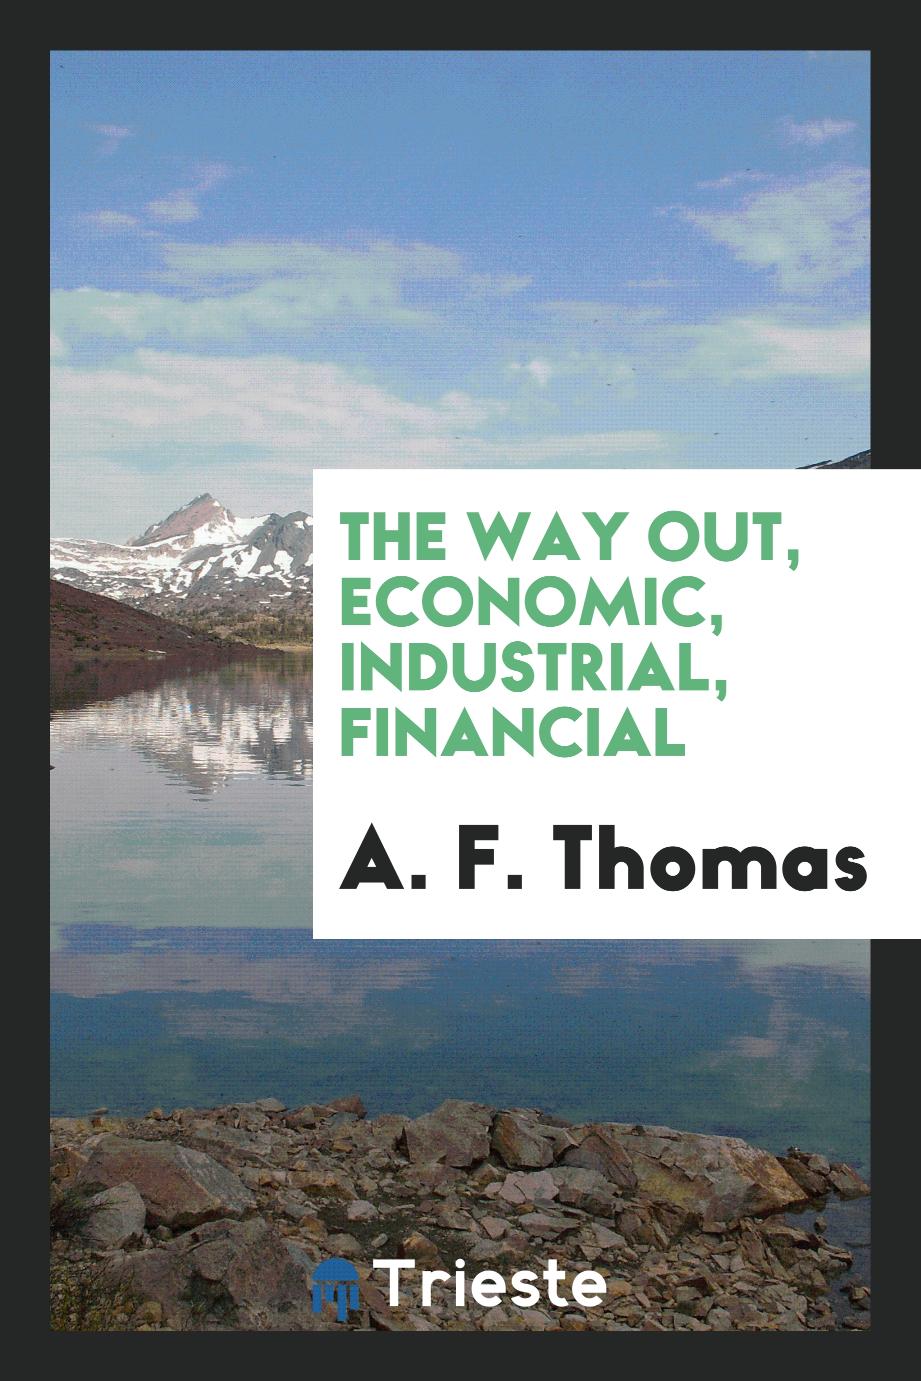 The way out, economic, industrial, financial